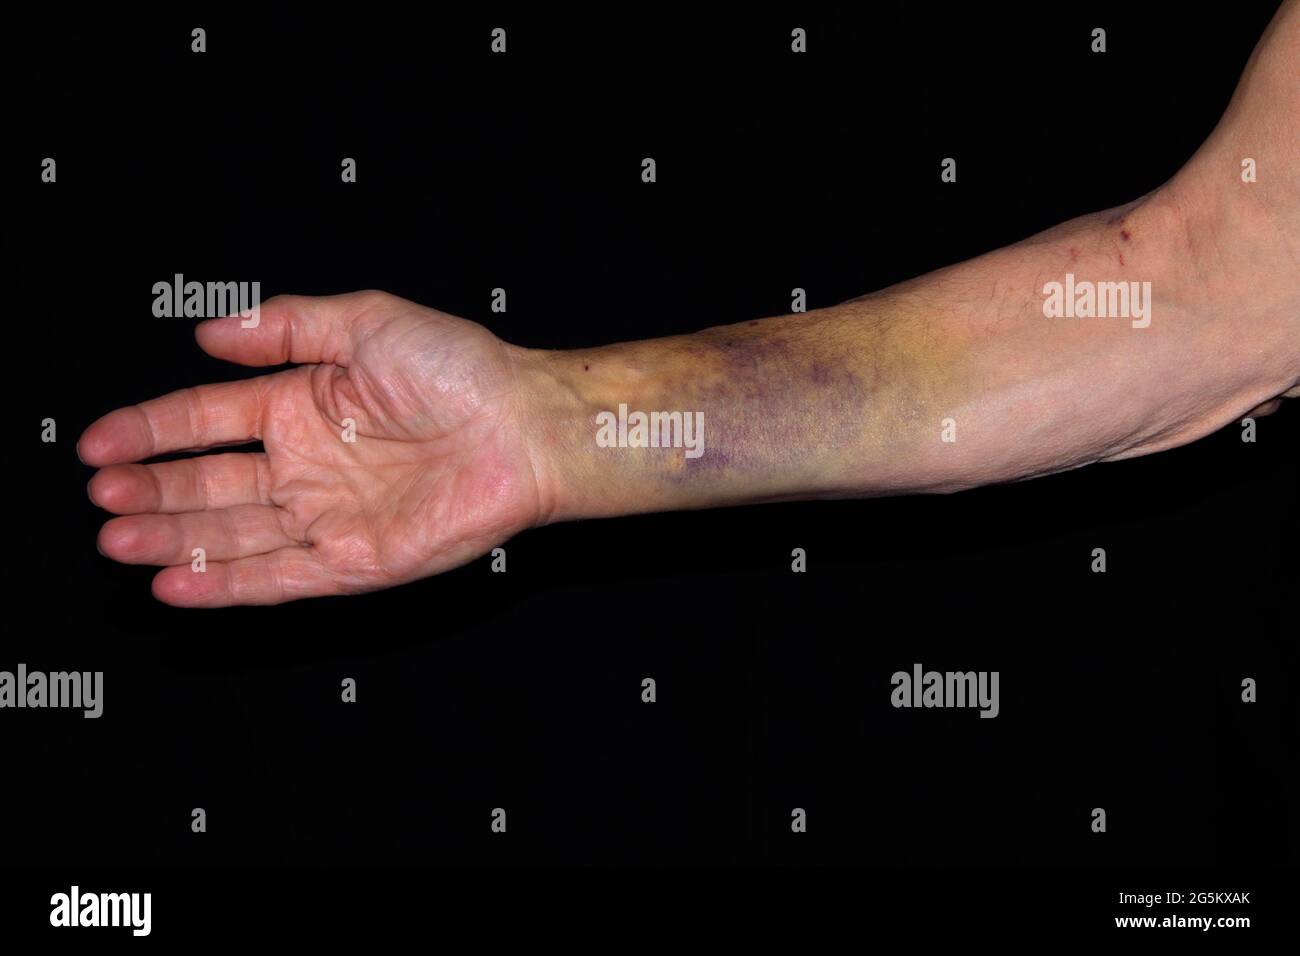 Patient With A Bruise Hematoma On The Right Arm After Insertion Of A